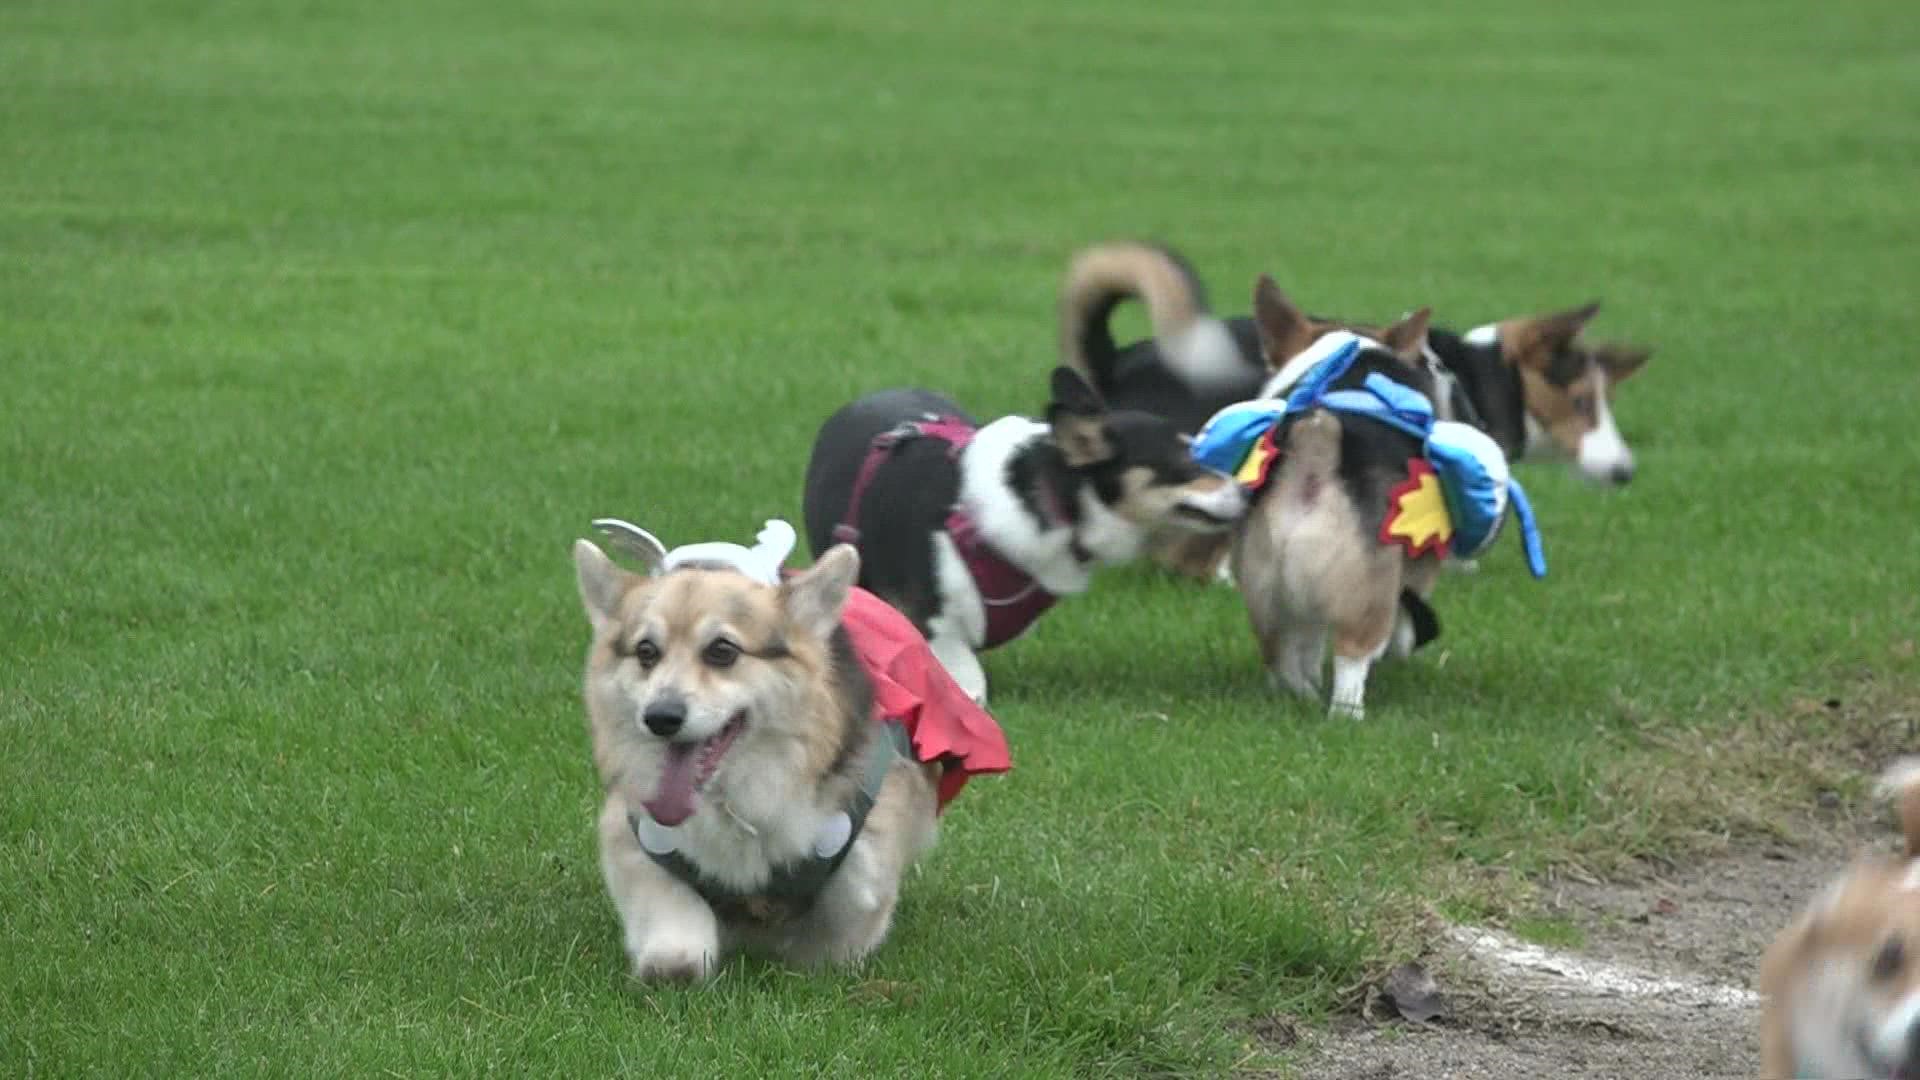 On Saturday, an army of corgis dressed their best arrived at Riverside Park.